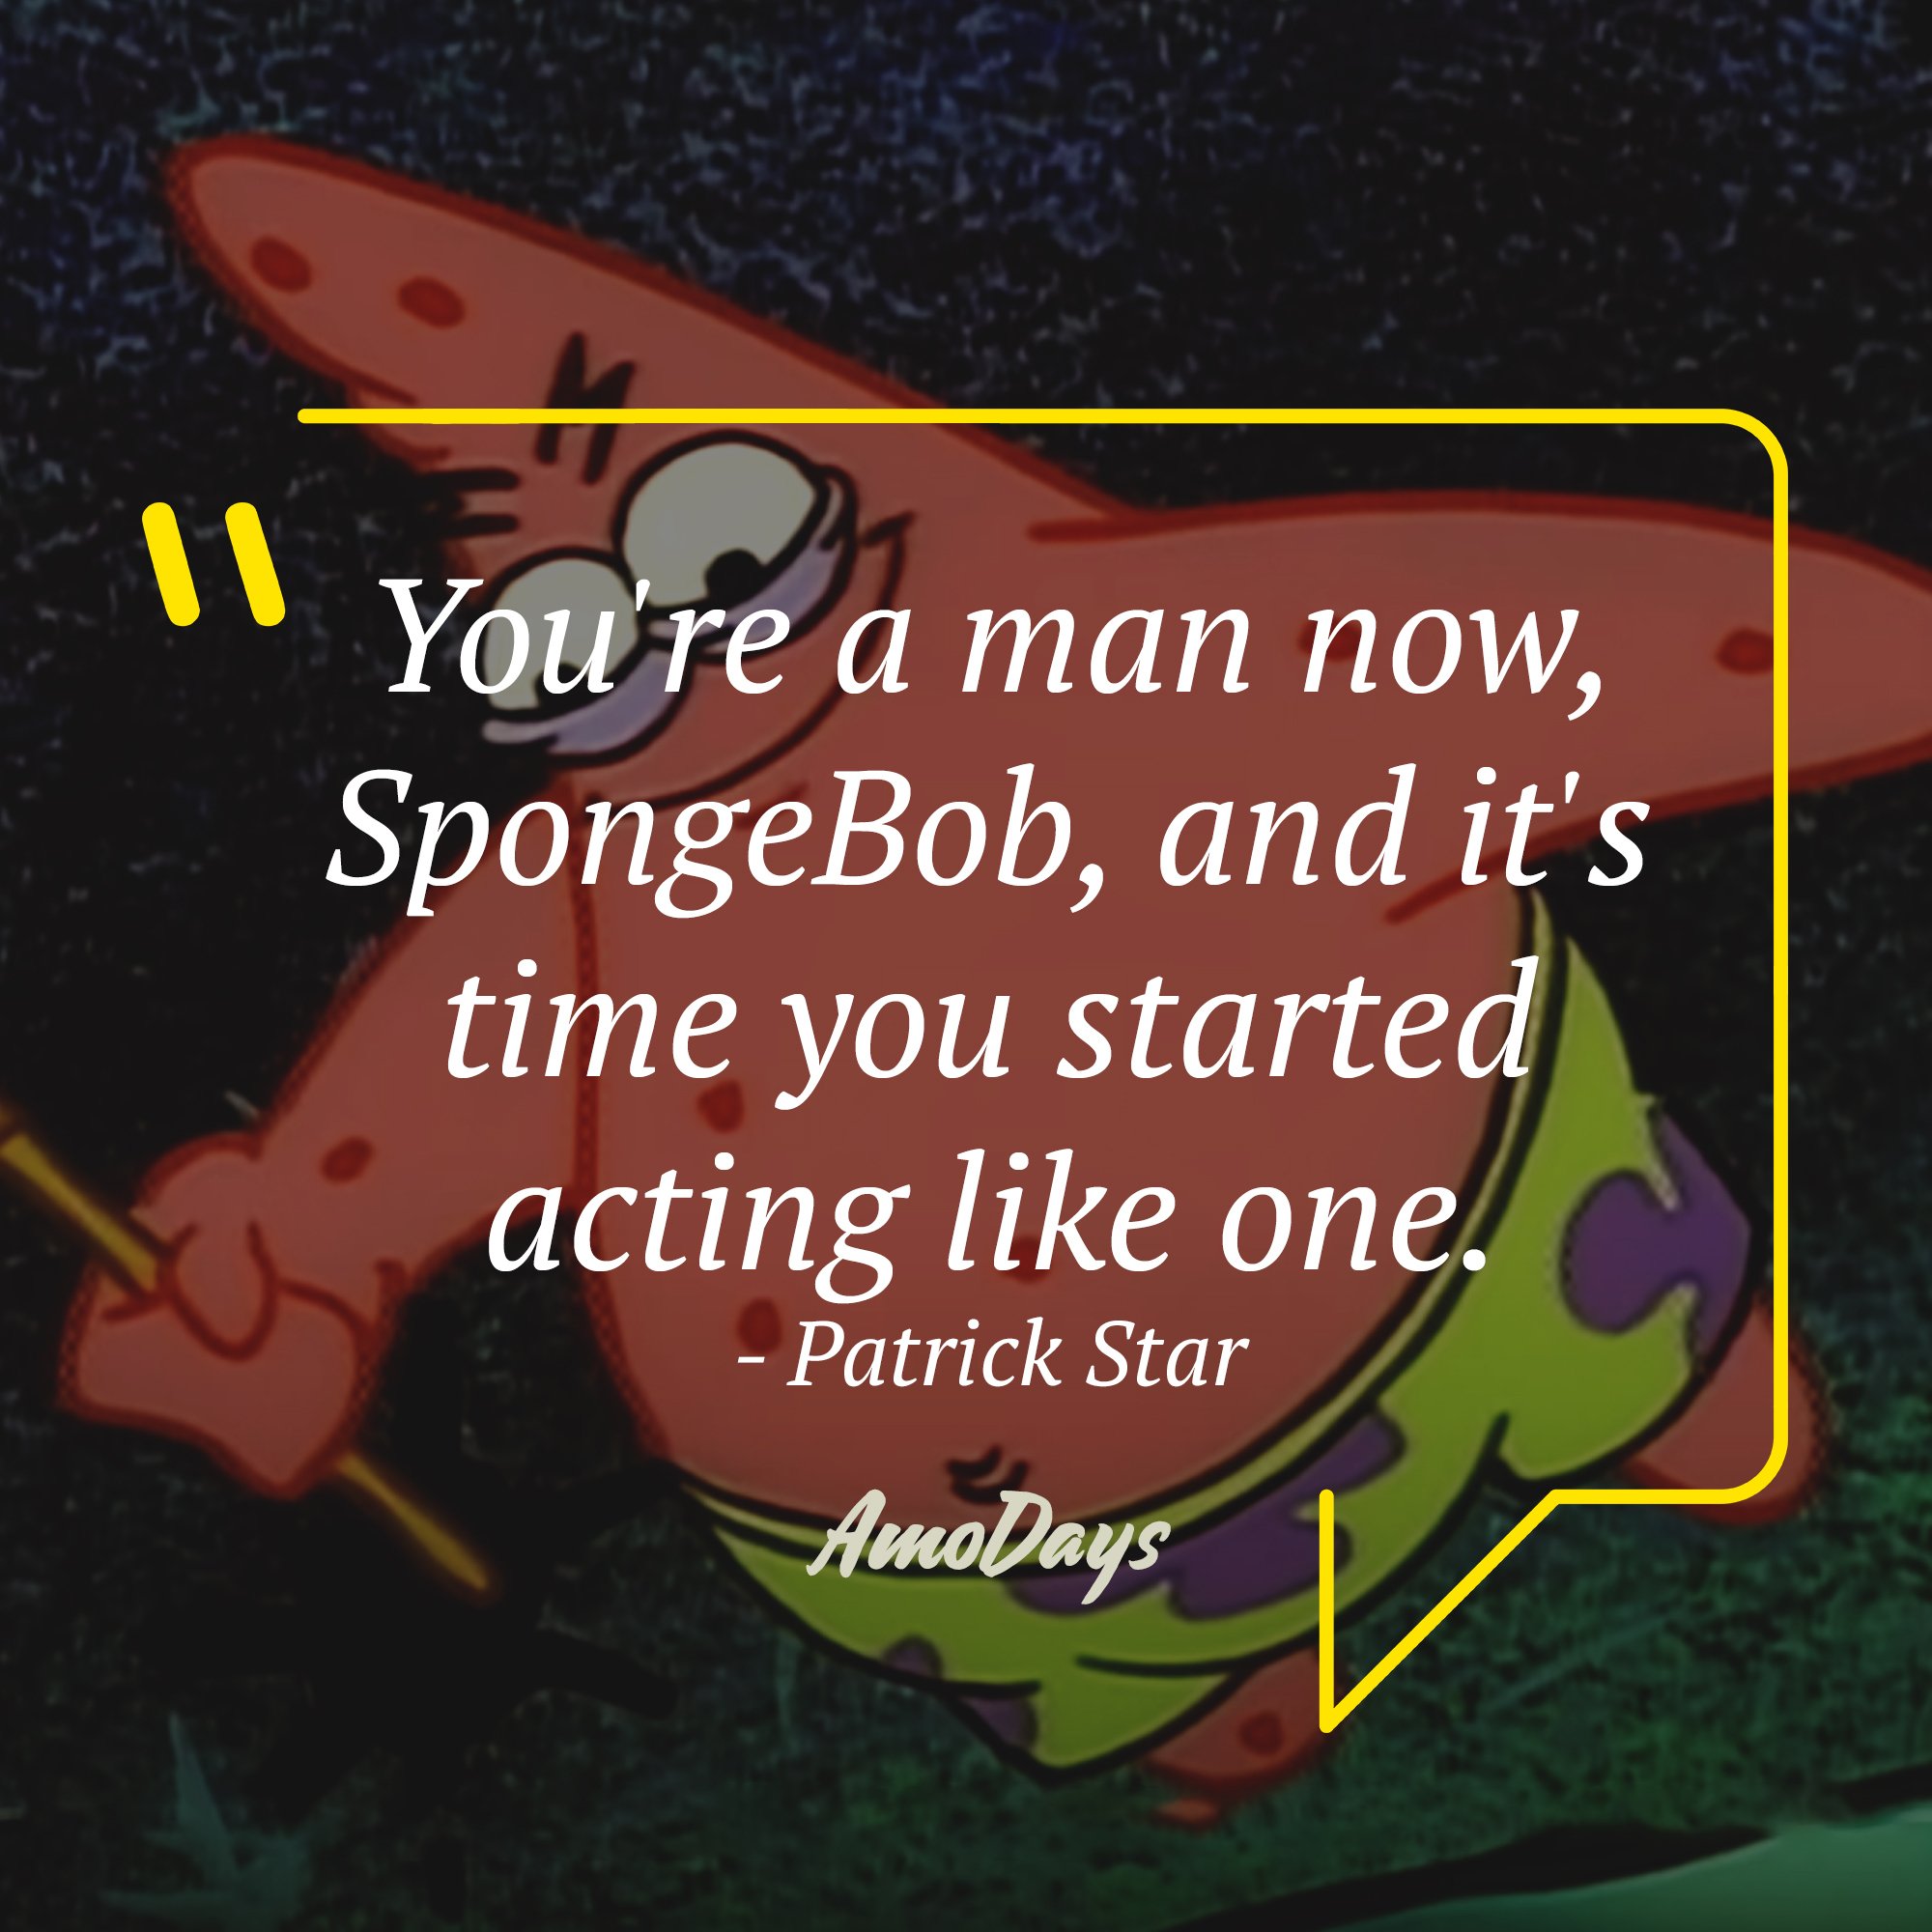 Patrick Star's quote: "You're a man now, SpongeBob, and it's time you started acting like one." | Source: AmoDays